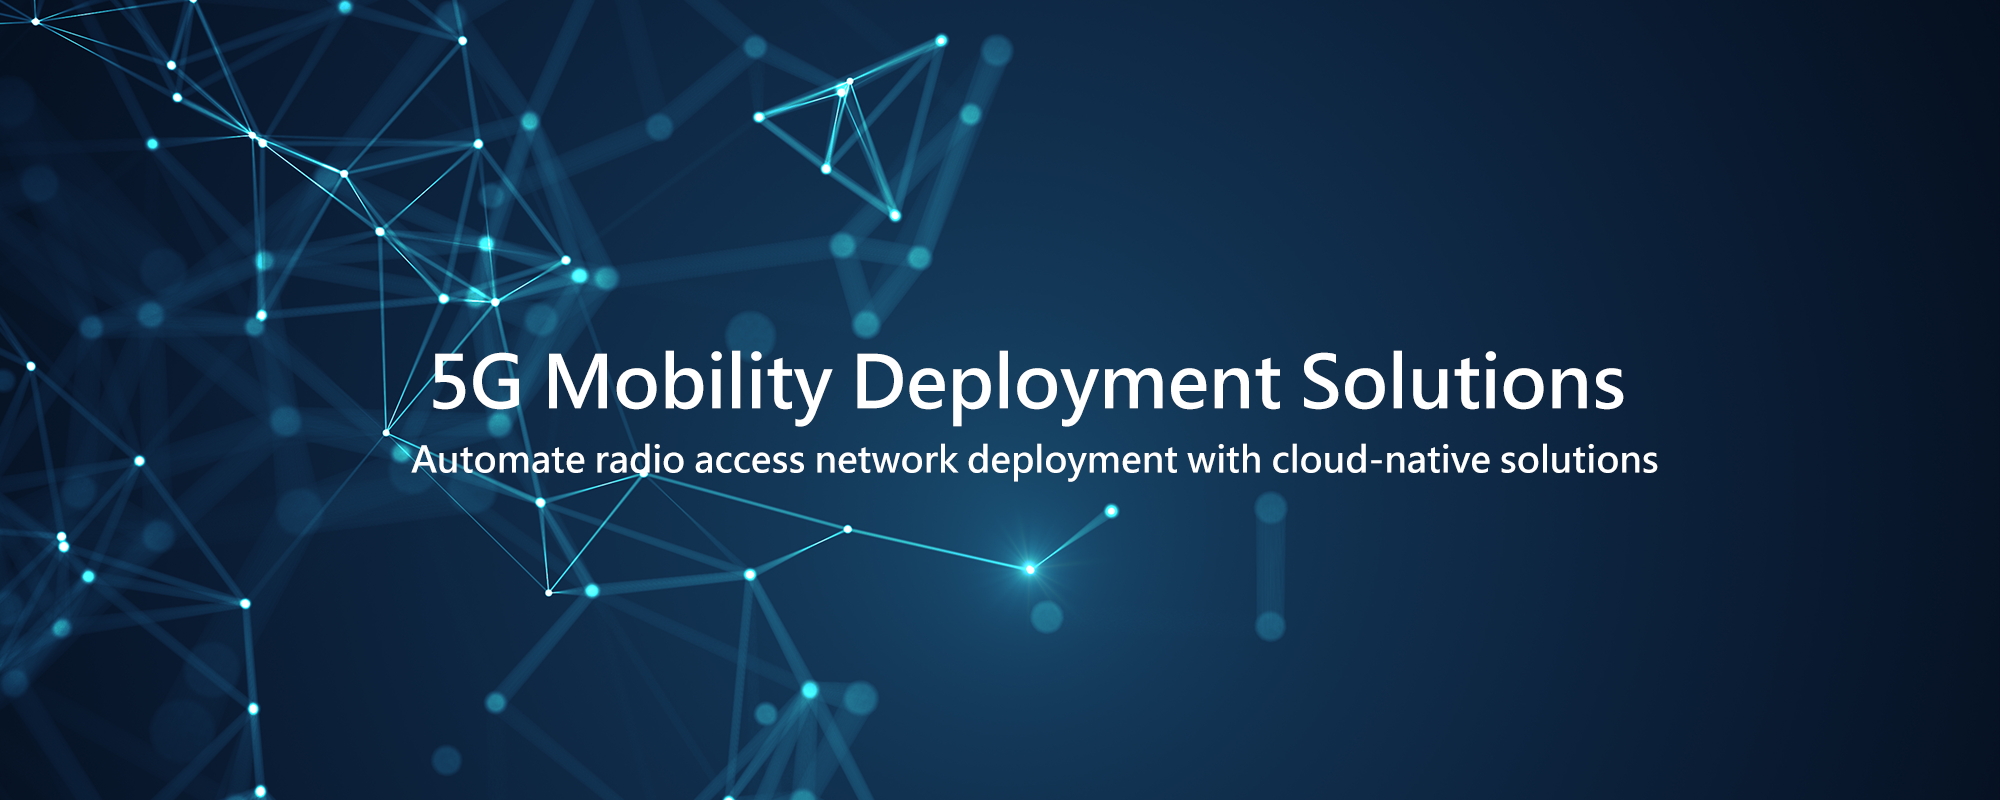 5G Mobility Deployment Solutions1